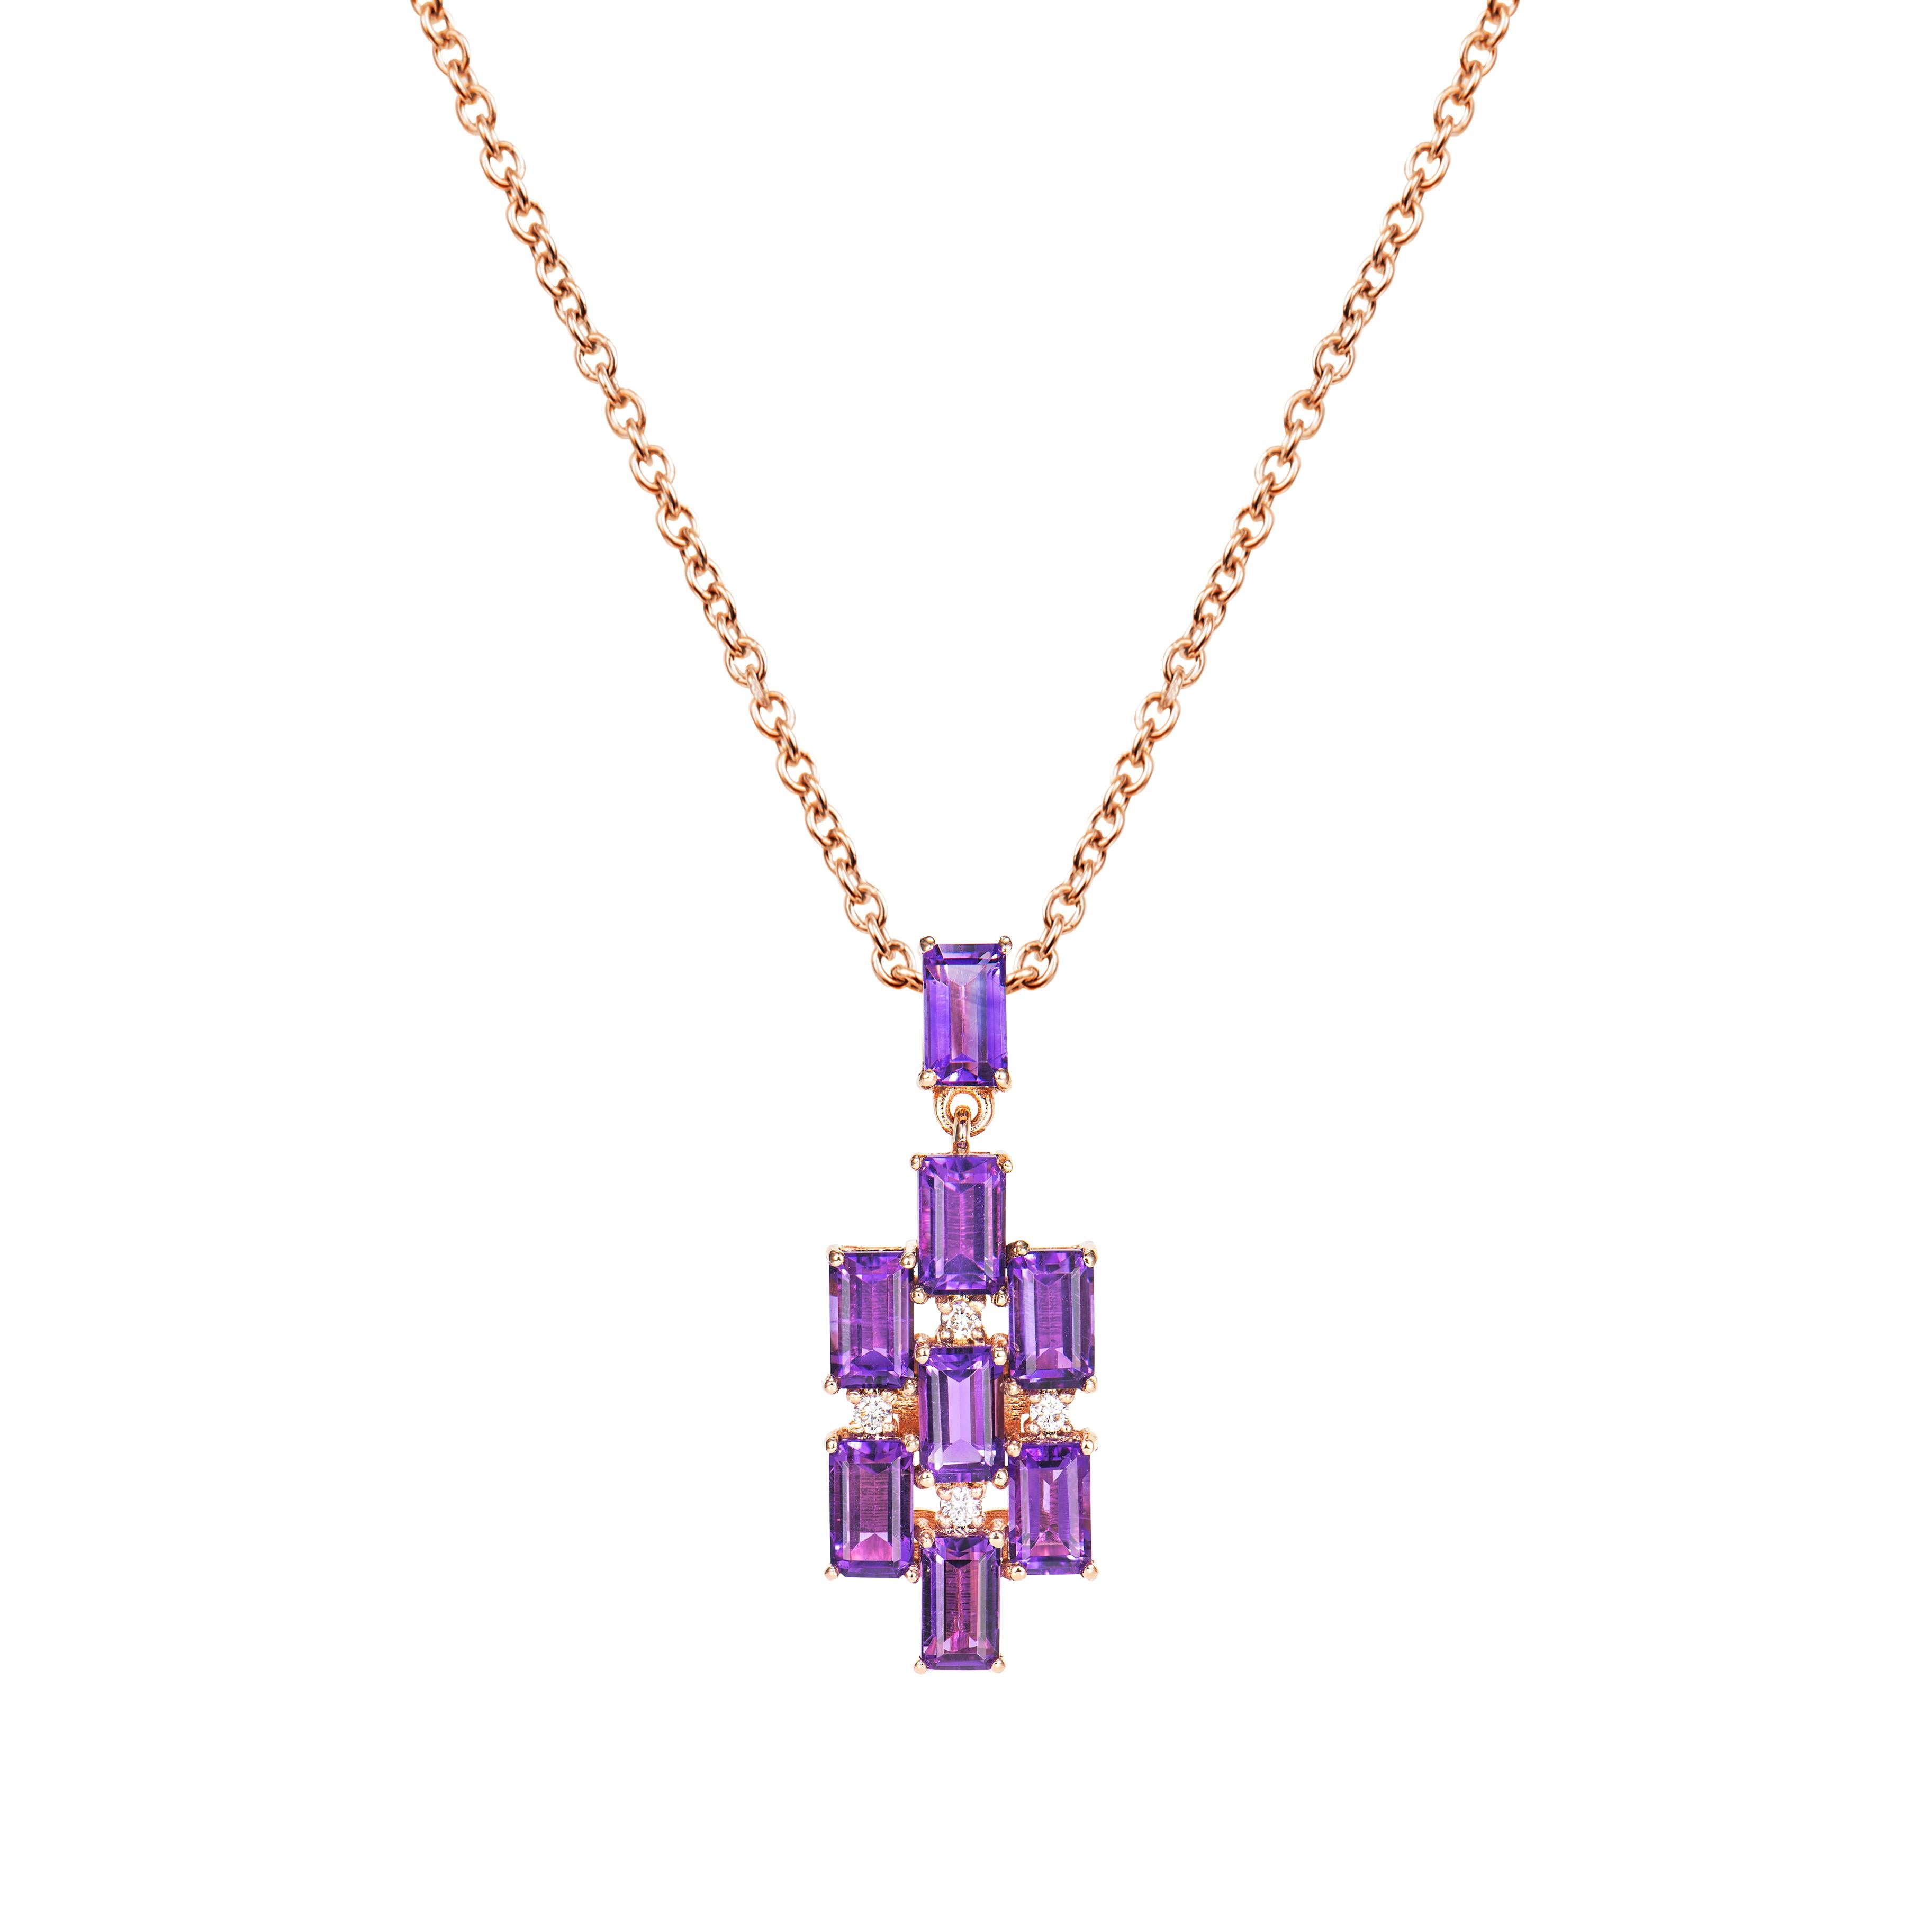 Octagon Cut 2.70 Carat Amethyst Pendant in 18Karat Rose Gold with White Diamond. For Sale